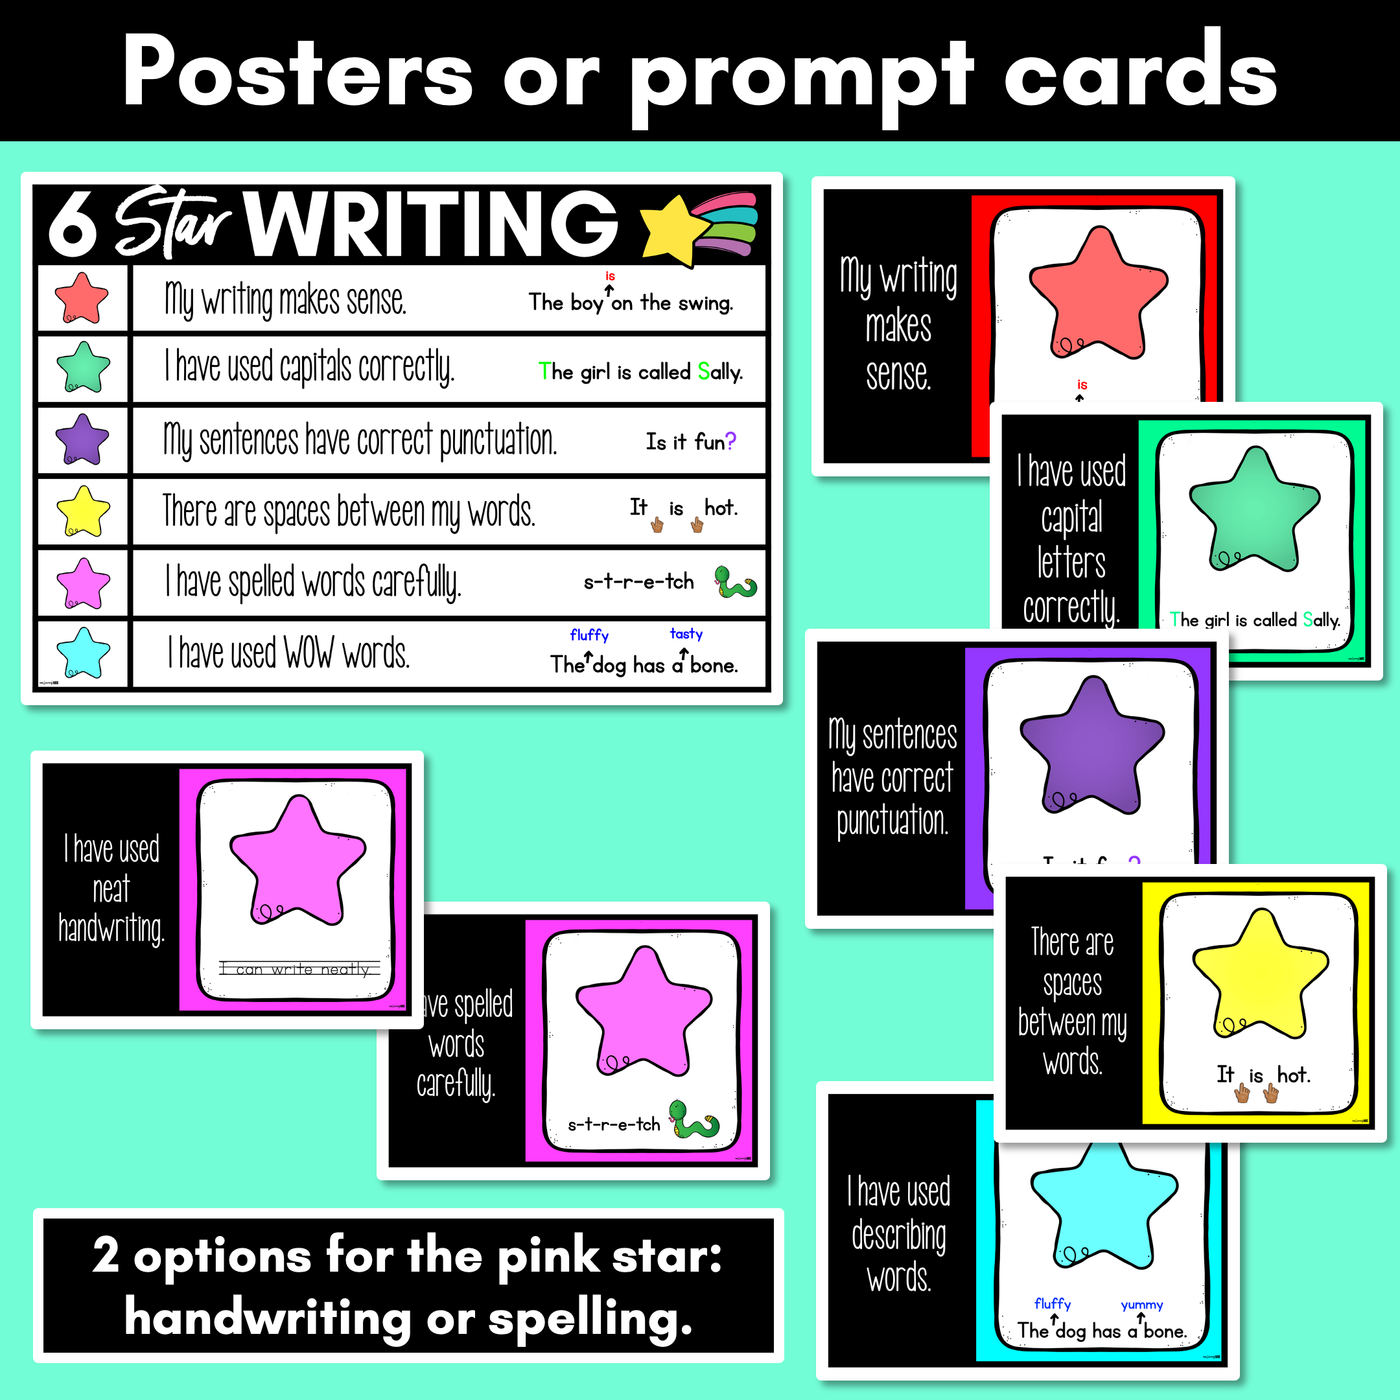 6 Star Editing Checklist | Posters & Practice Pages